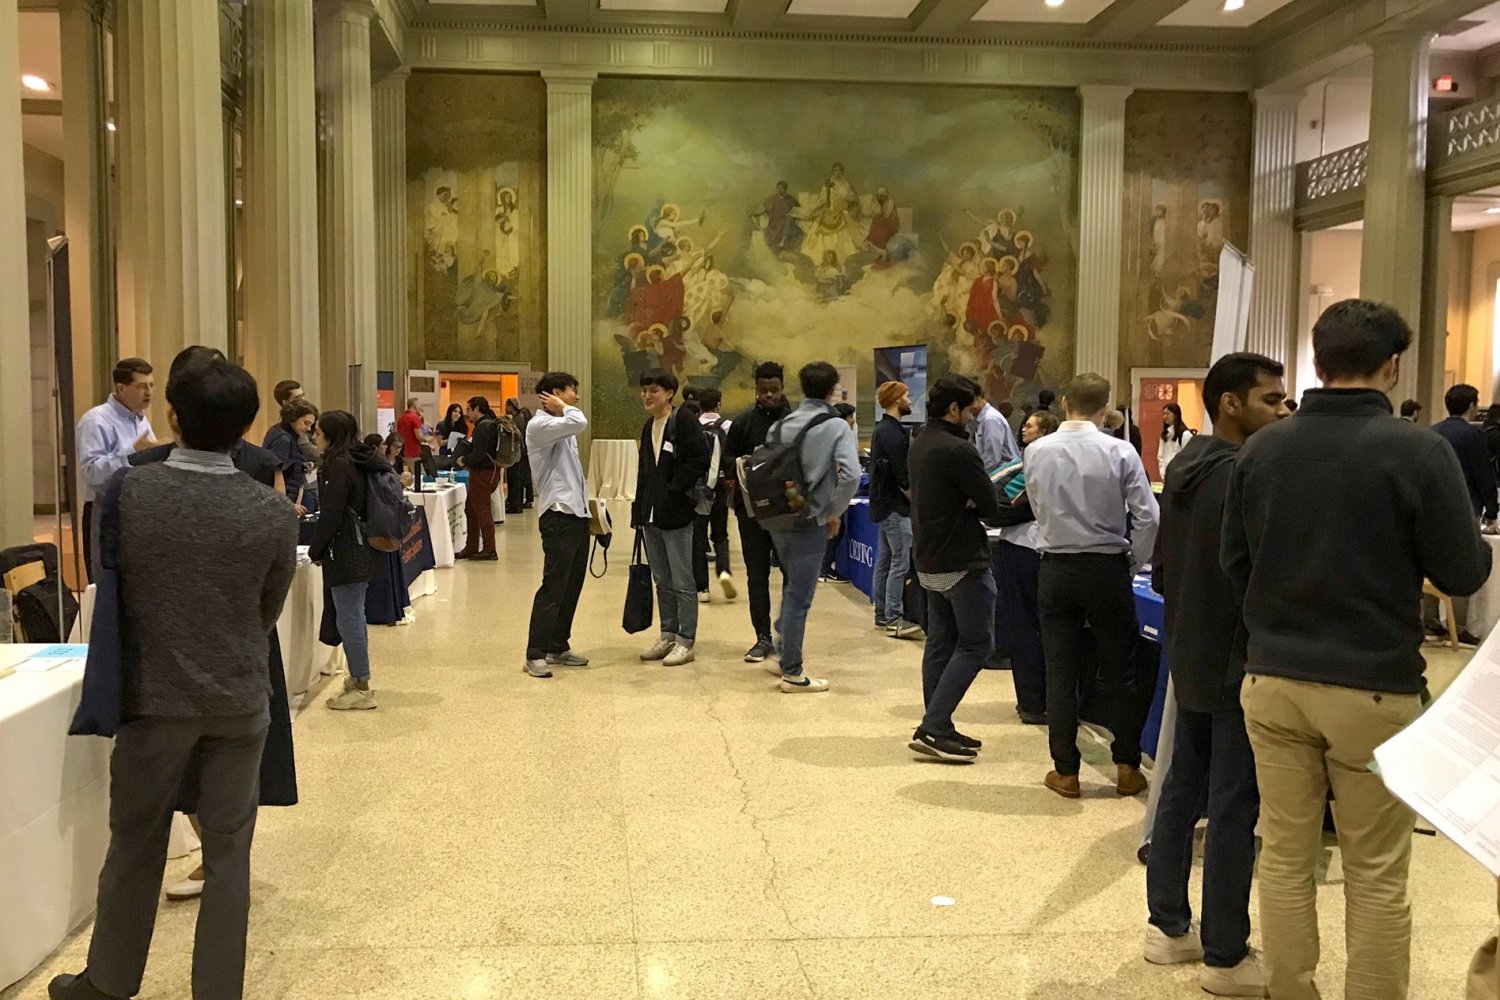 The Department of Materials Science and Engineering held its first-ever career fair on Oct. 20, featuring recruiters from energy, health care, manufacturing, and more.